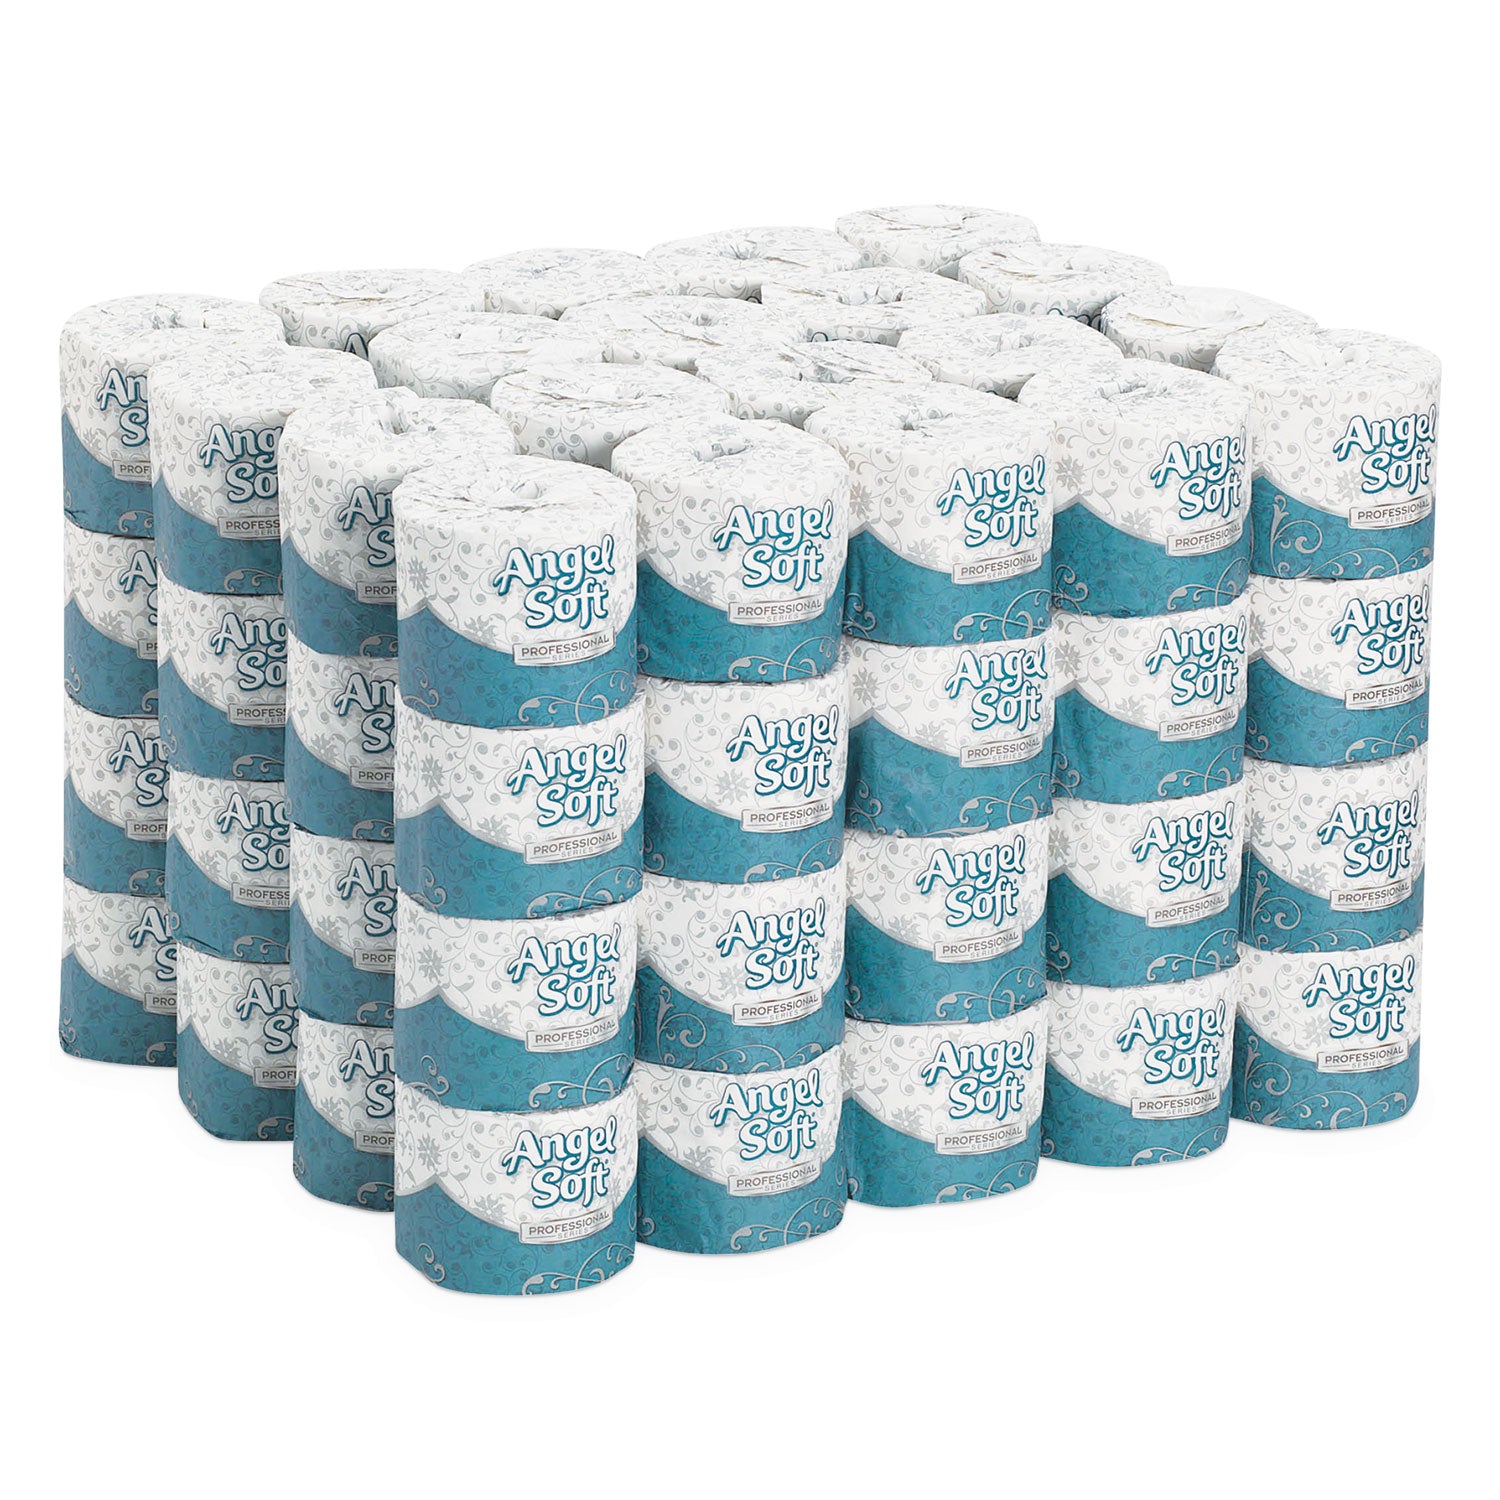 Angel Soft ps Premium Bathroom Tissue, Septic Safe, 2-Ply, White, 450 Sheets/Roll, 80 Rolls/Carton - 